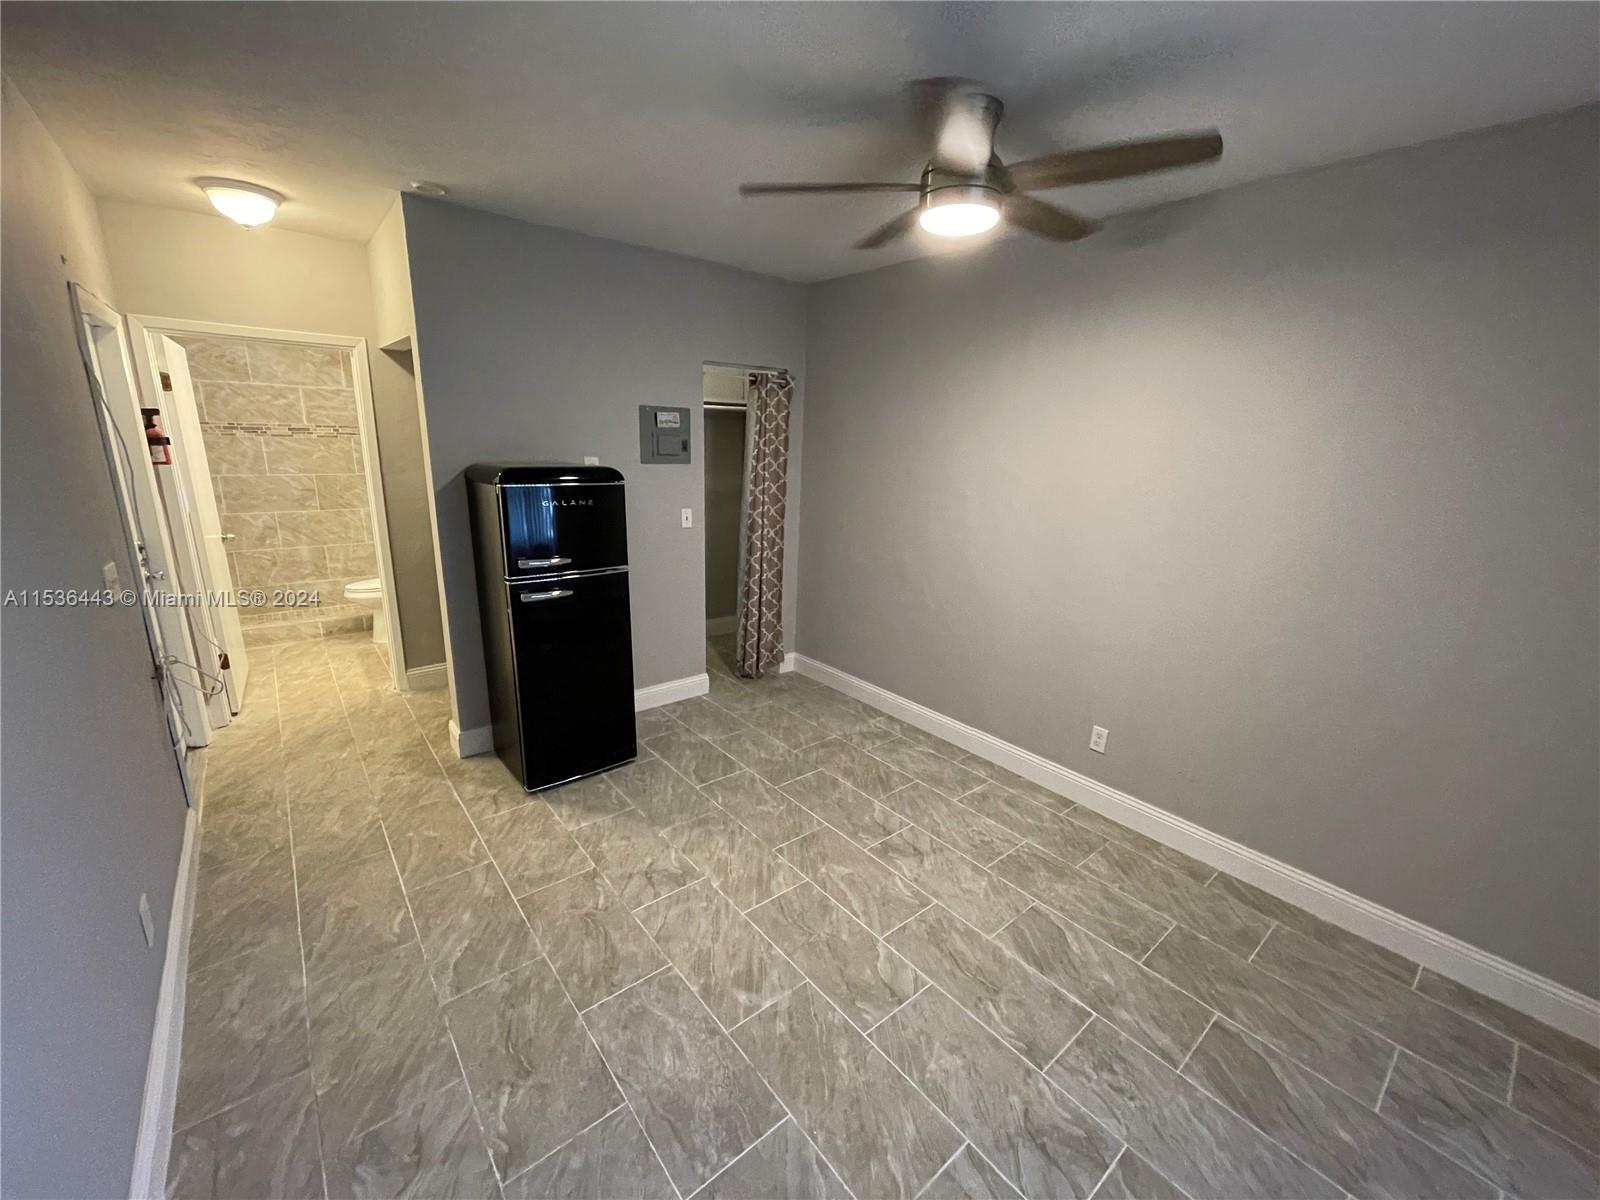 an empty room with closet and a ceiling fan